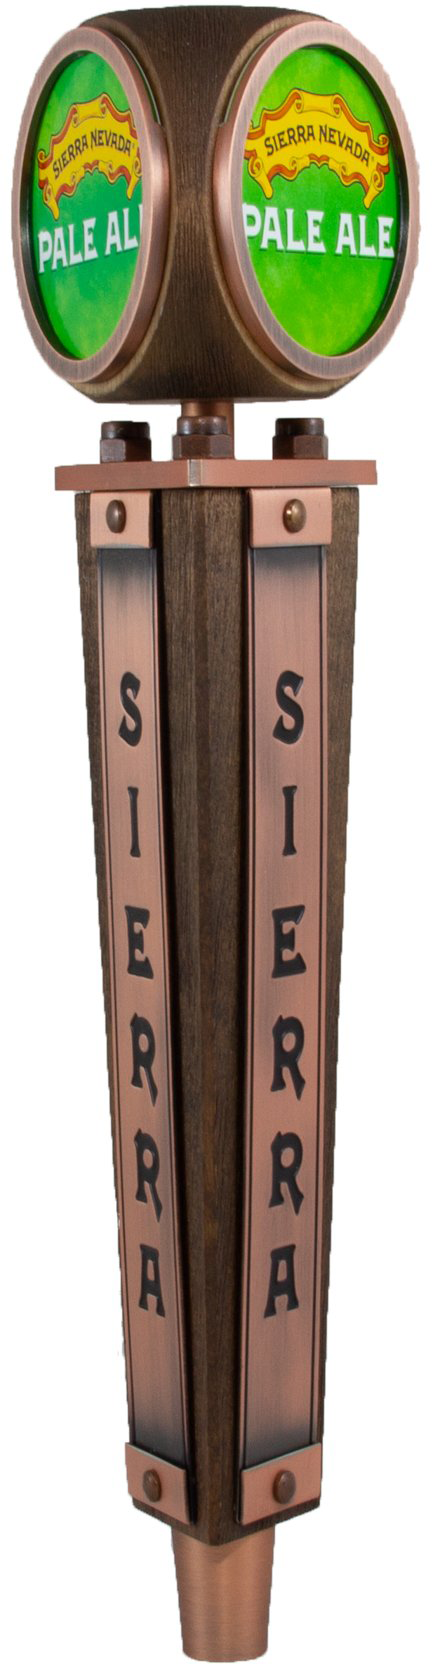 Sierra Nevada Brewing Co. Pale Ale 3 sided tap handle